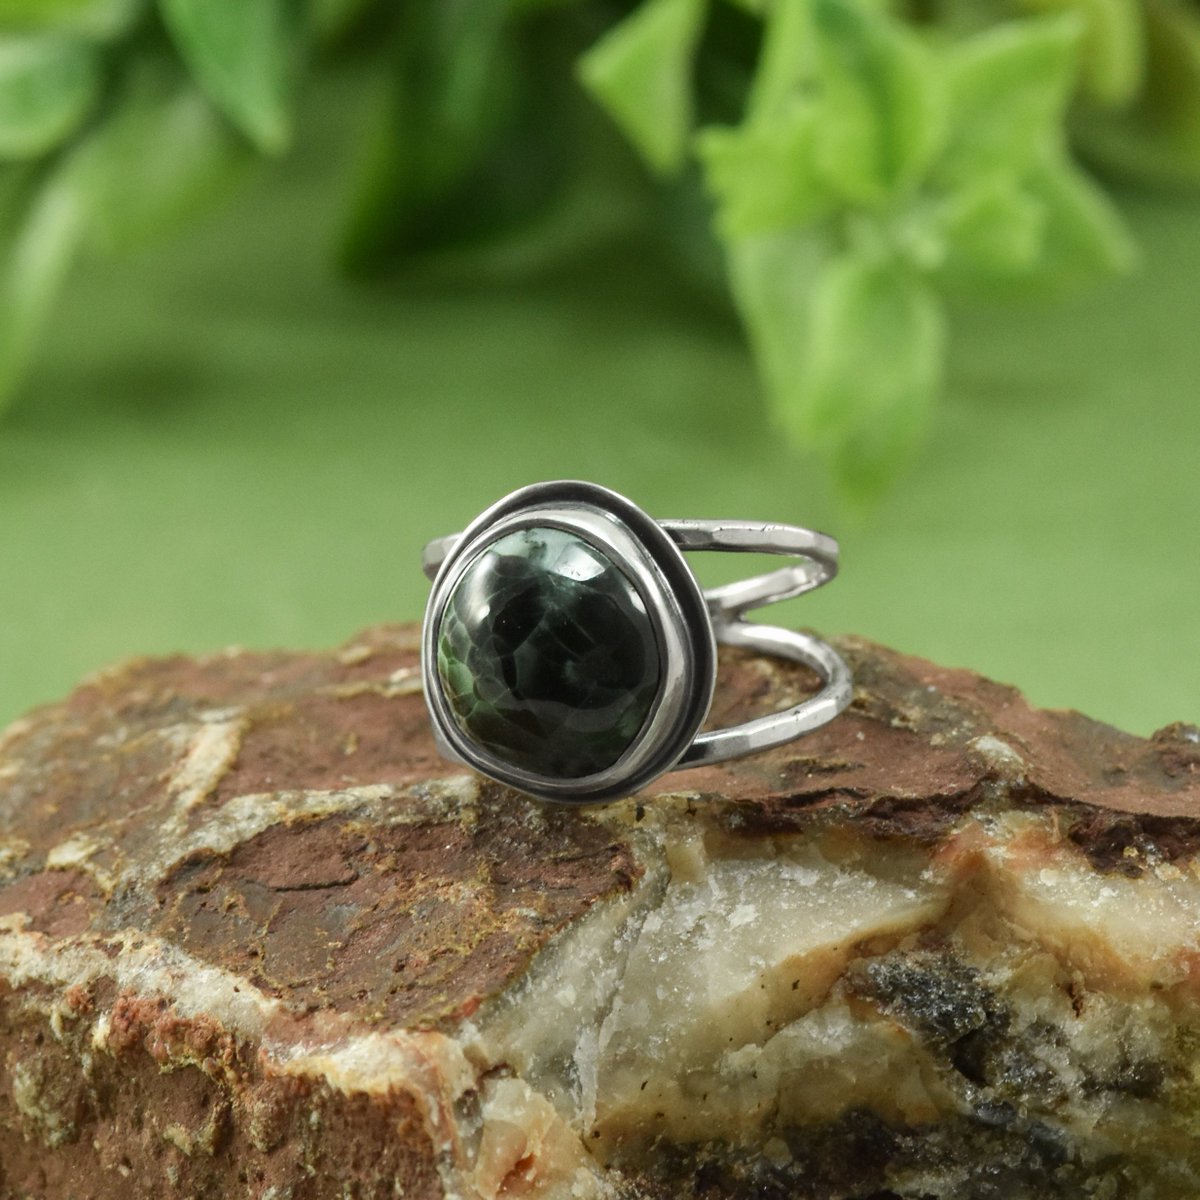 Triangular, oval, or round. No matter which Greenstone Ring you get, it's sure to be one-of-a-kind!
bethmillner.com/collections/ne…
#bethmillnerjewelry #michigangreenstone #greenstone #rings #greatlakes #lakesuperior #uniquejewelry #michiganmade #marquettemi #sterlingsilver #gemstones